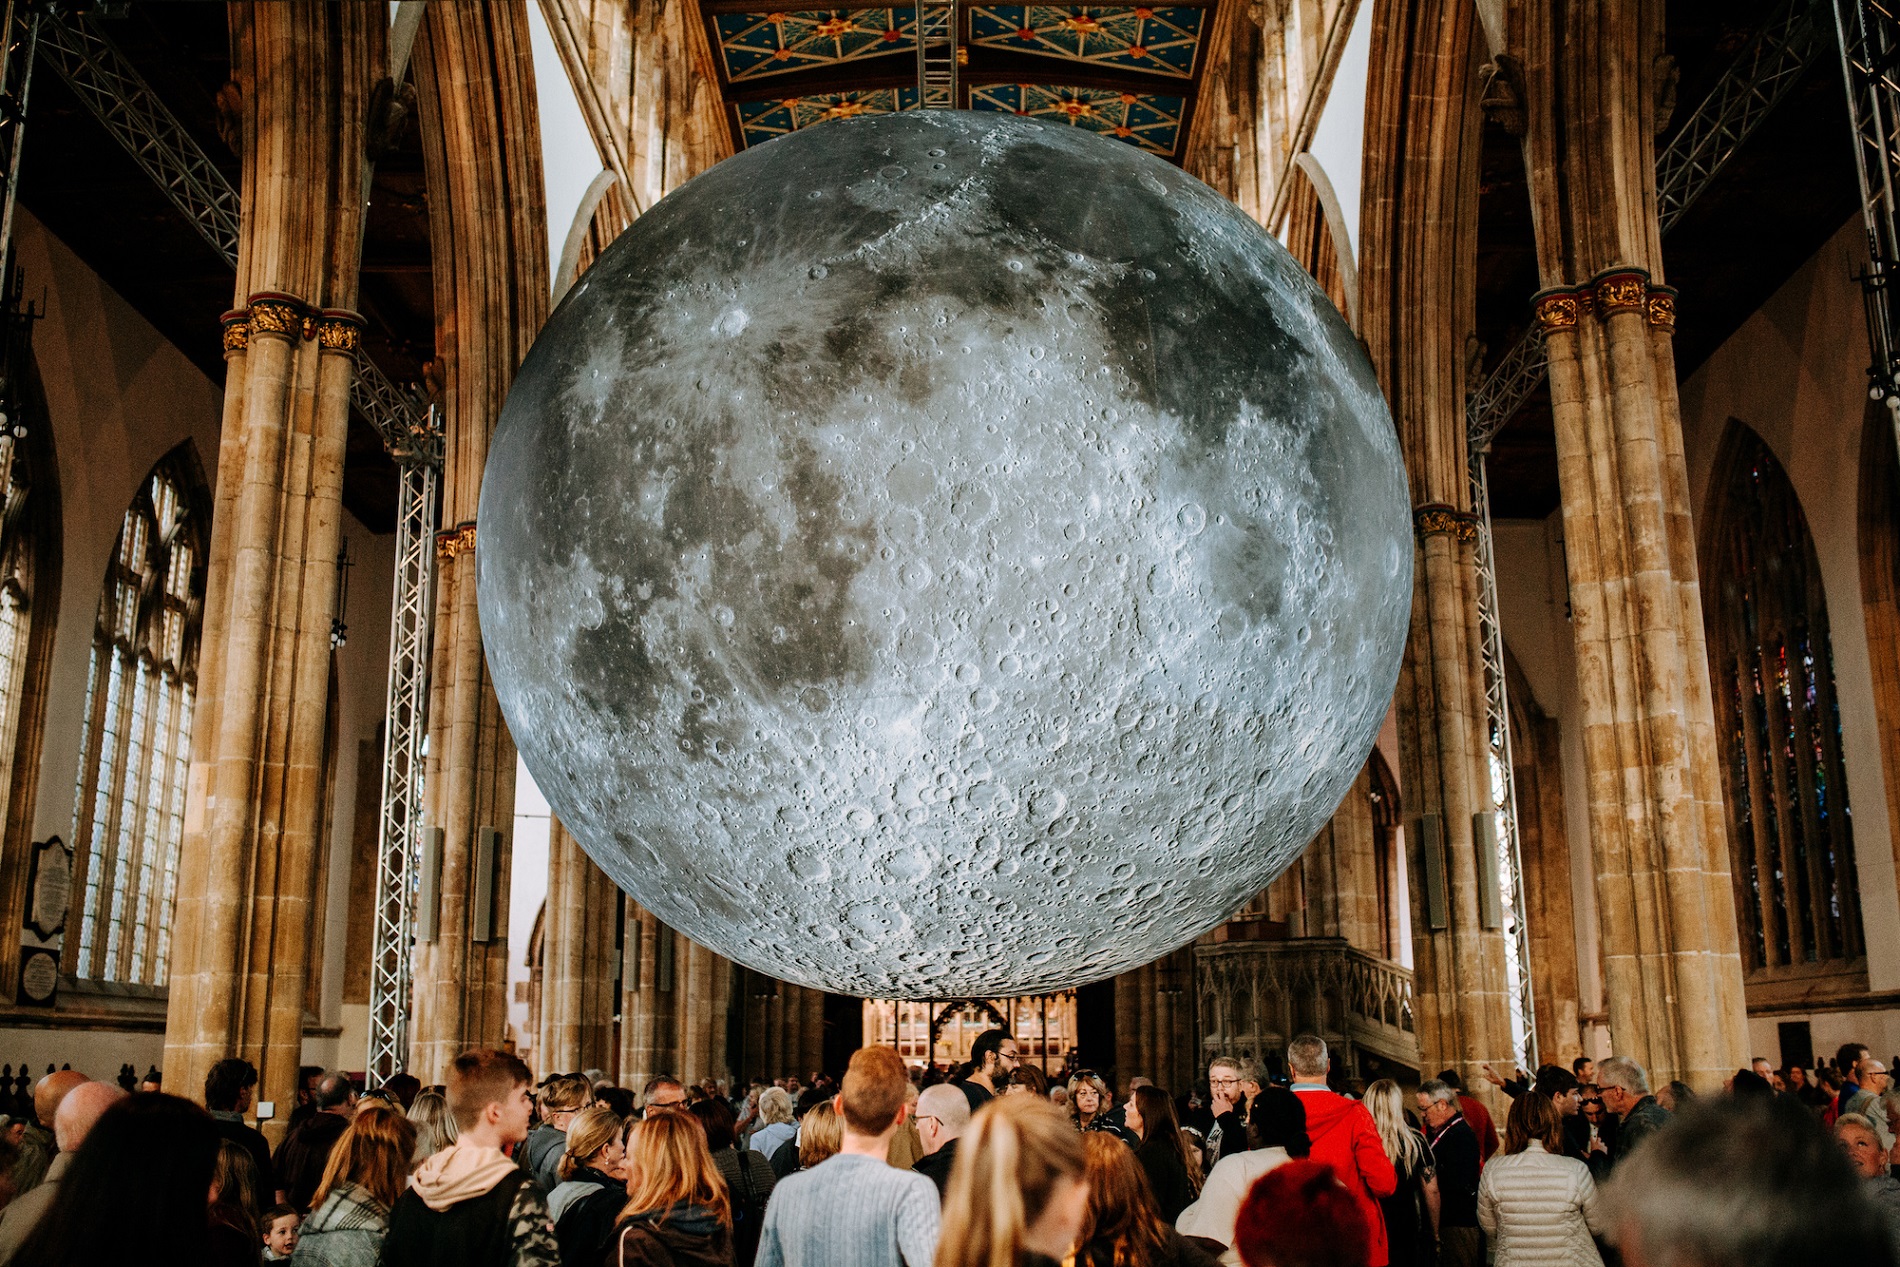 The Museum of The Moon installation was the biggest draw to Hull Minster in 2018, attracting 82,000 people. Picture: Tom Arran/Freedom Festival